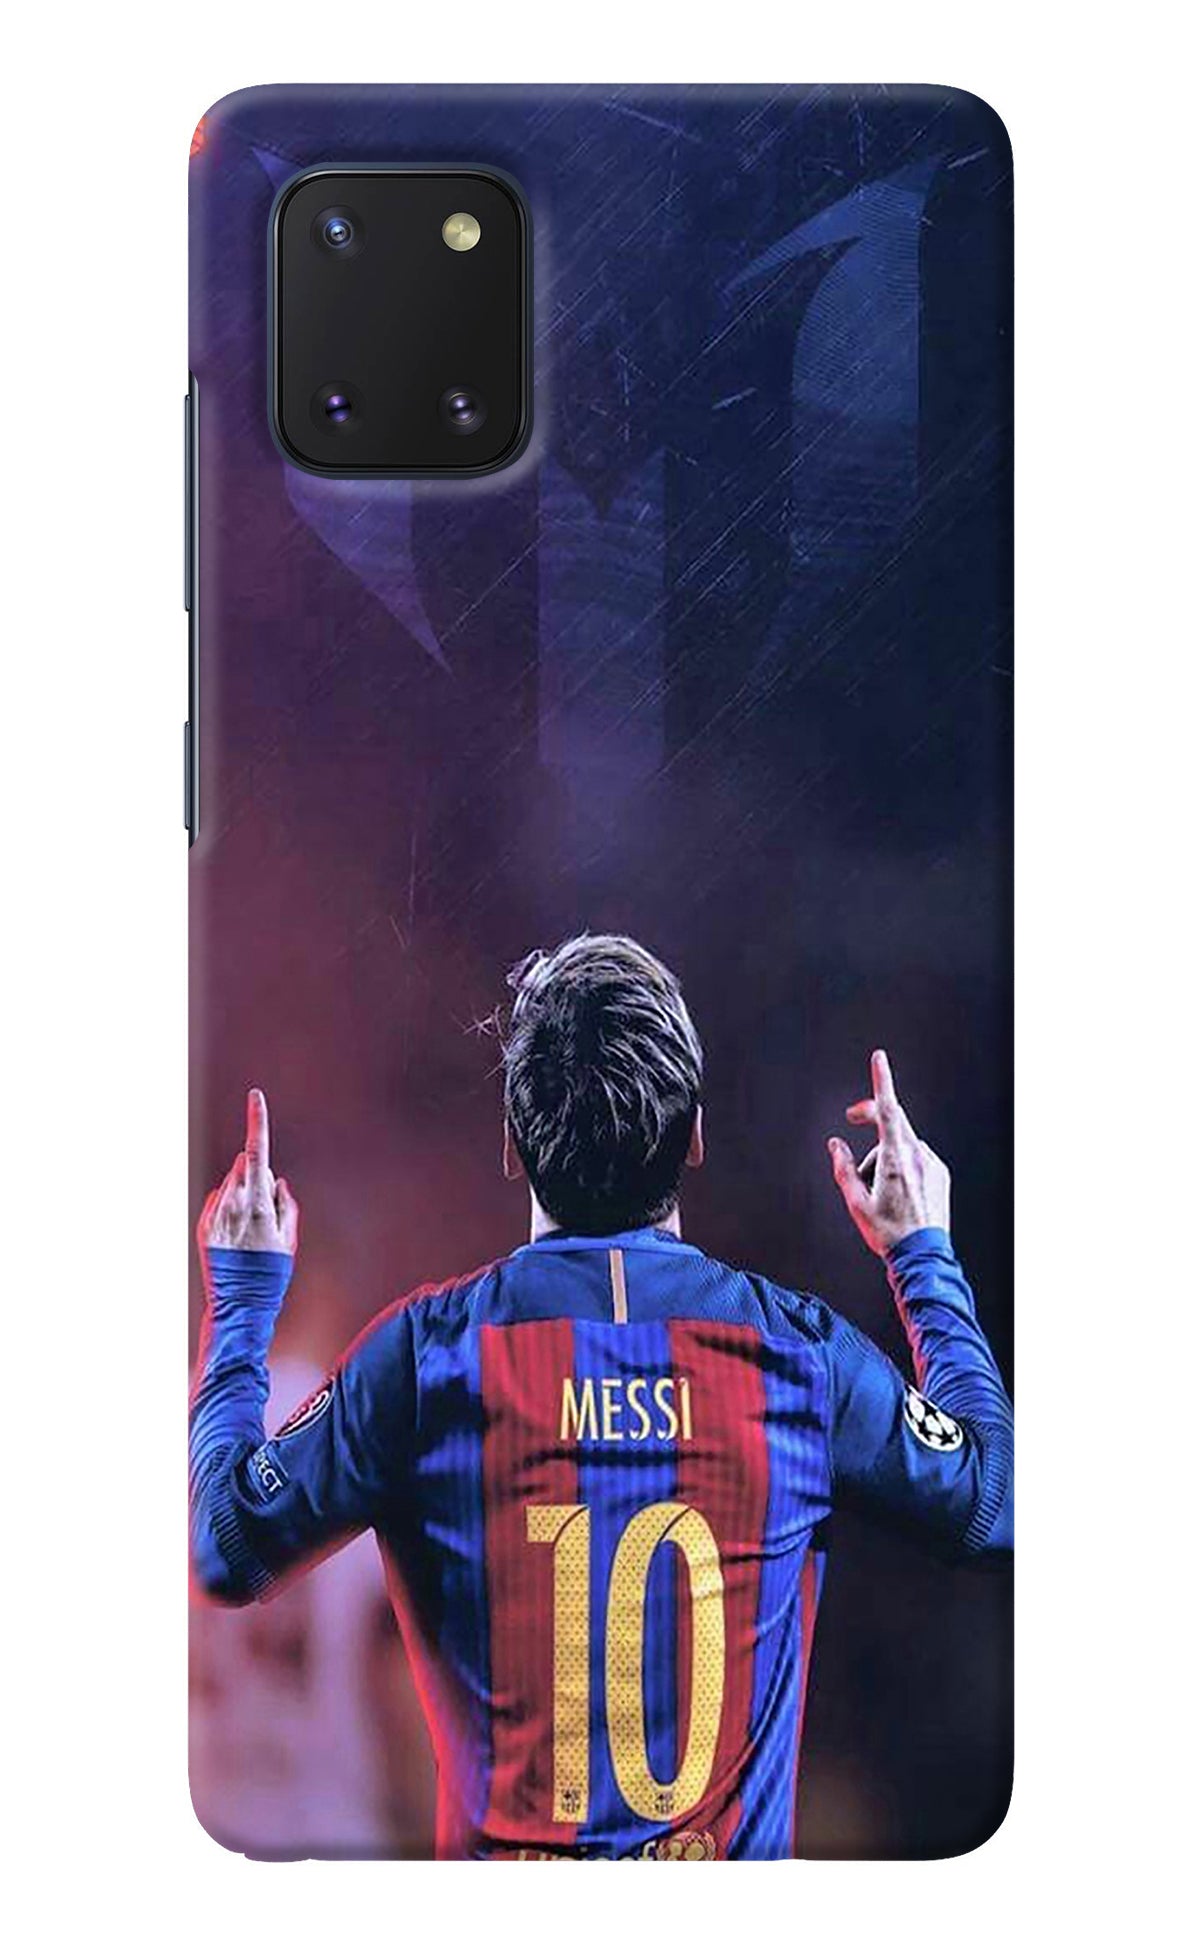 Messi Samsung Note 10 Lite Back Cover